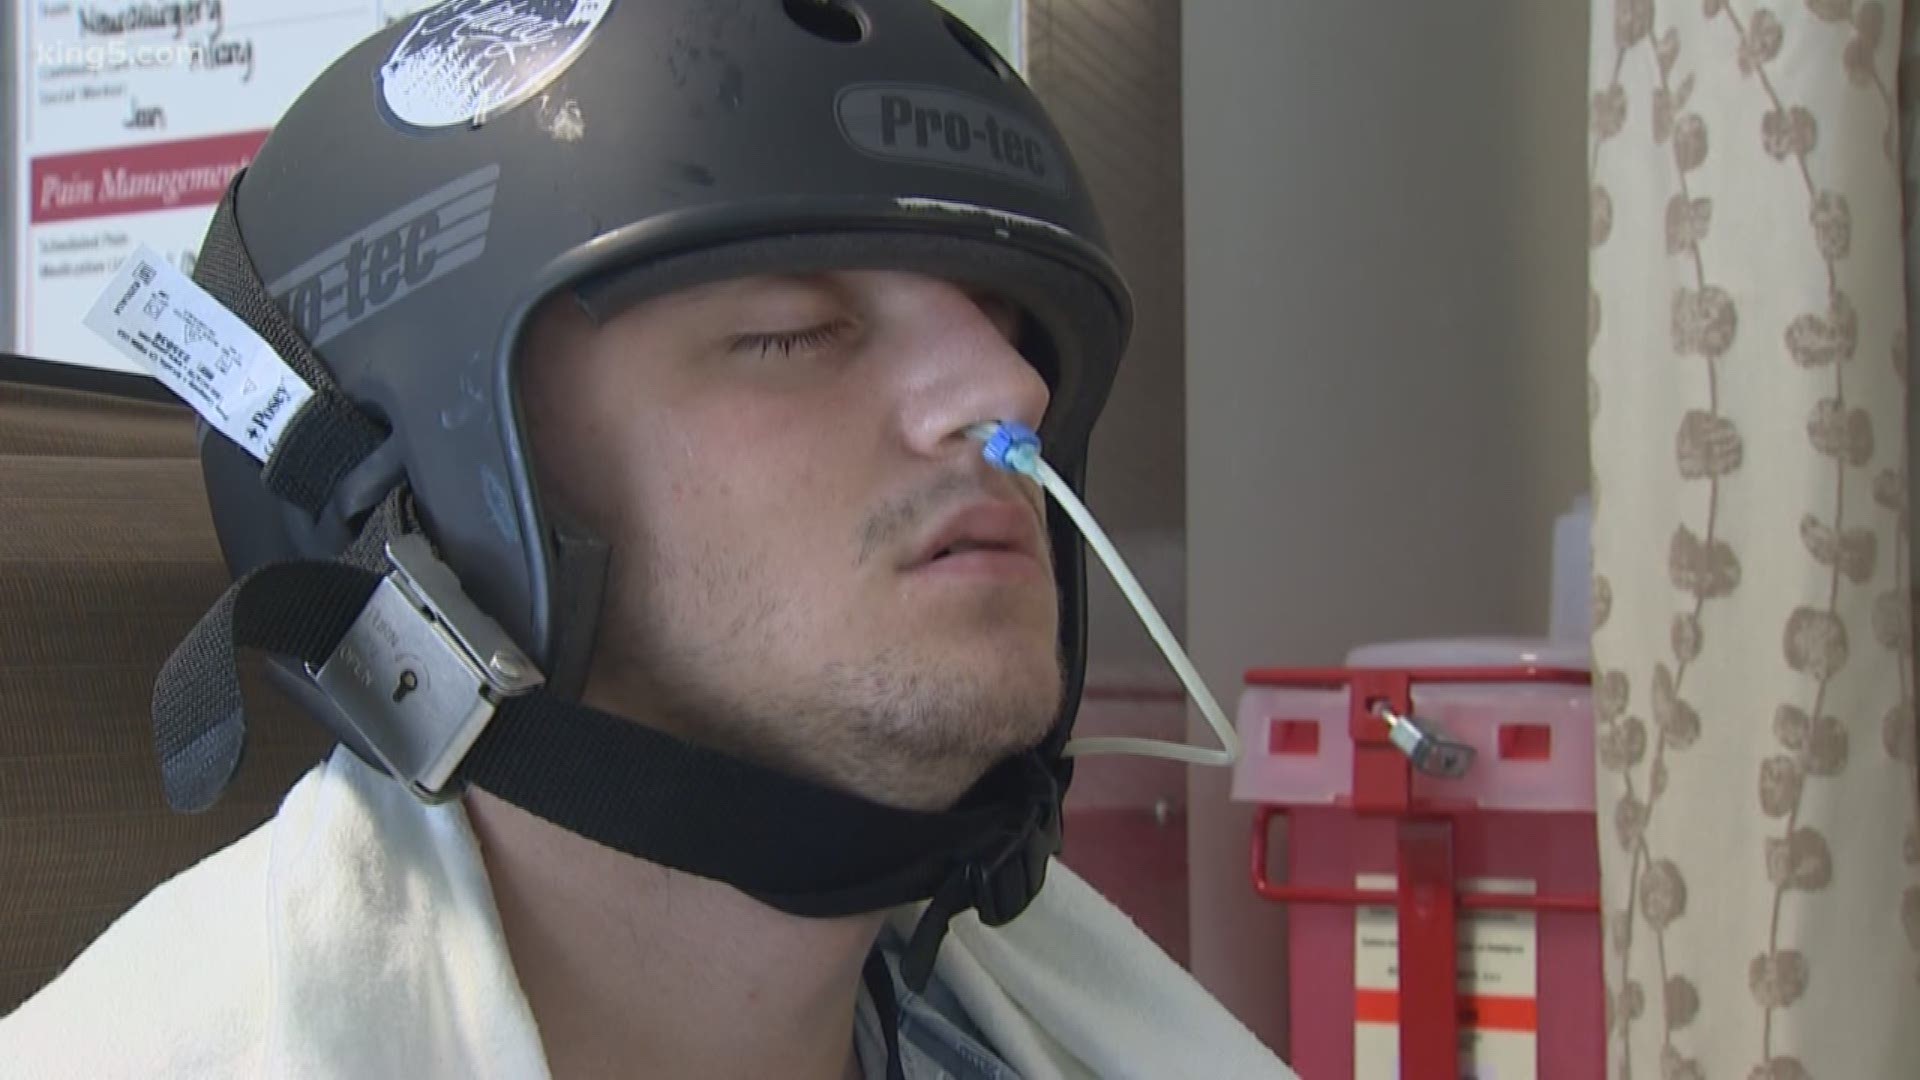 A 19-year-old from Bellevue is recovering at Harborview Medical Center after suffering a traumatic brain injury when he fell off his skateboard. KING 5’s Drew Mikklesen reports.